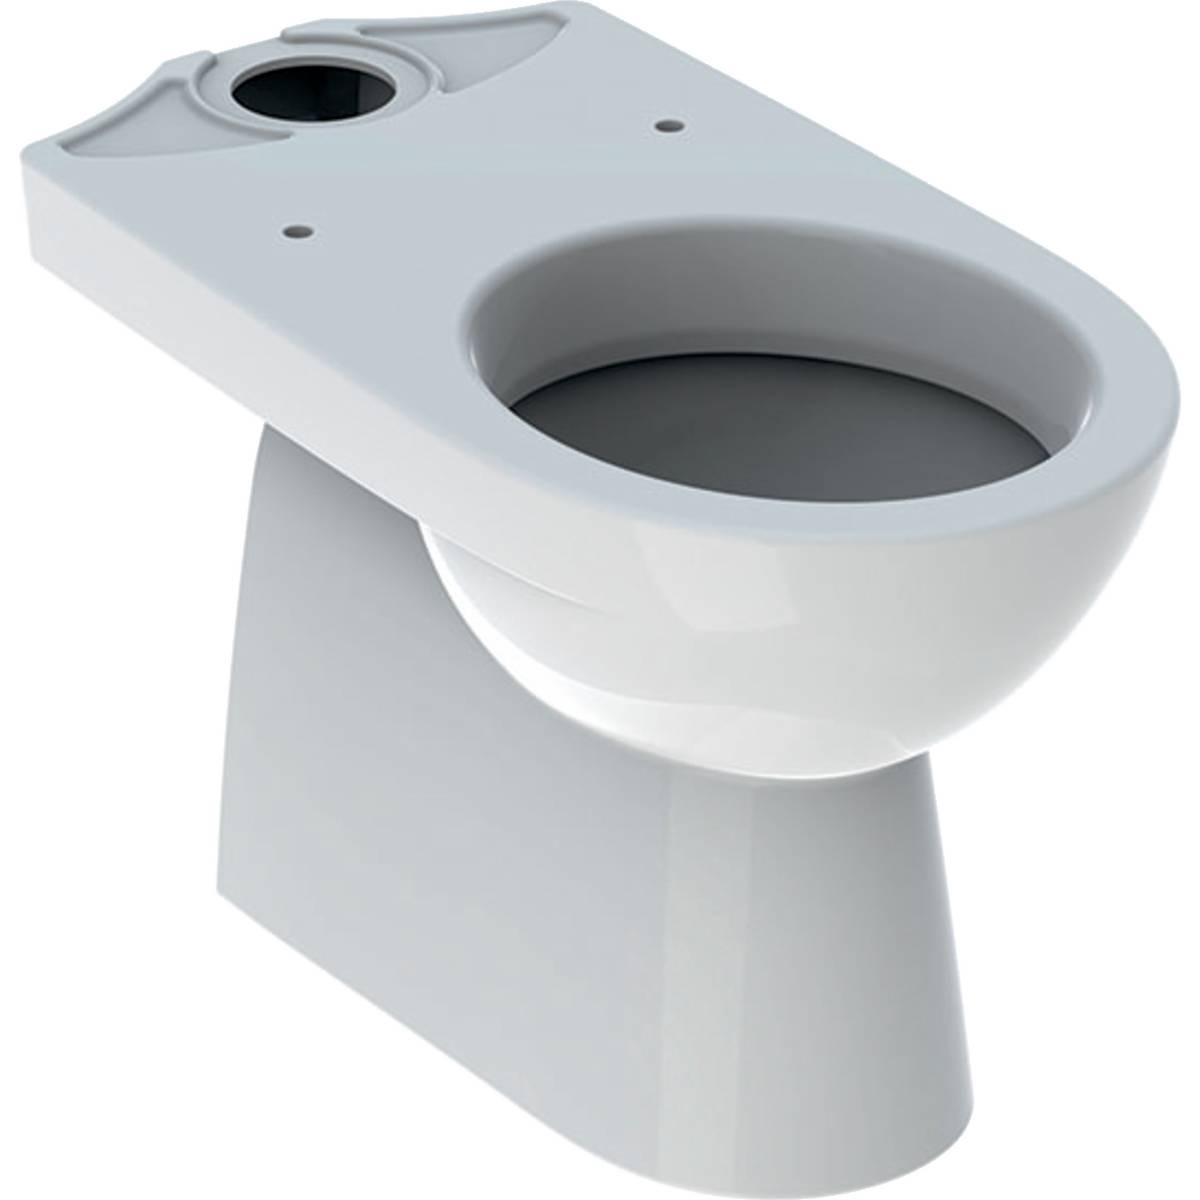 Selnova Floor-Standing WC For Close-Coupled Exposed Cistern, Washdown, Vertical Outlet, Semi-Shrouded